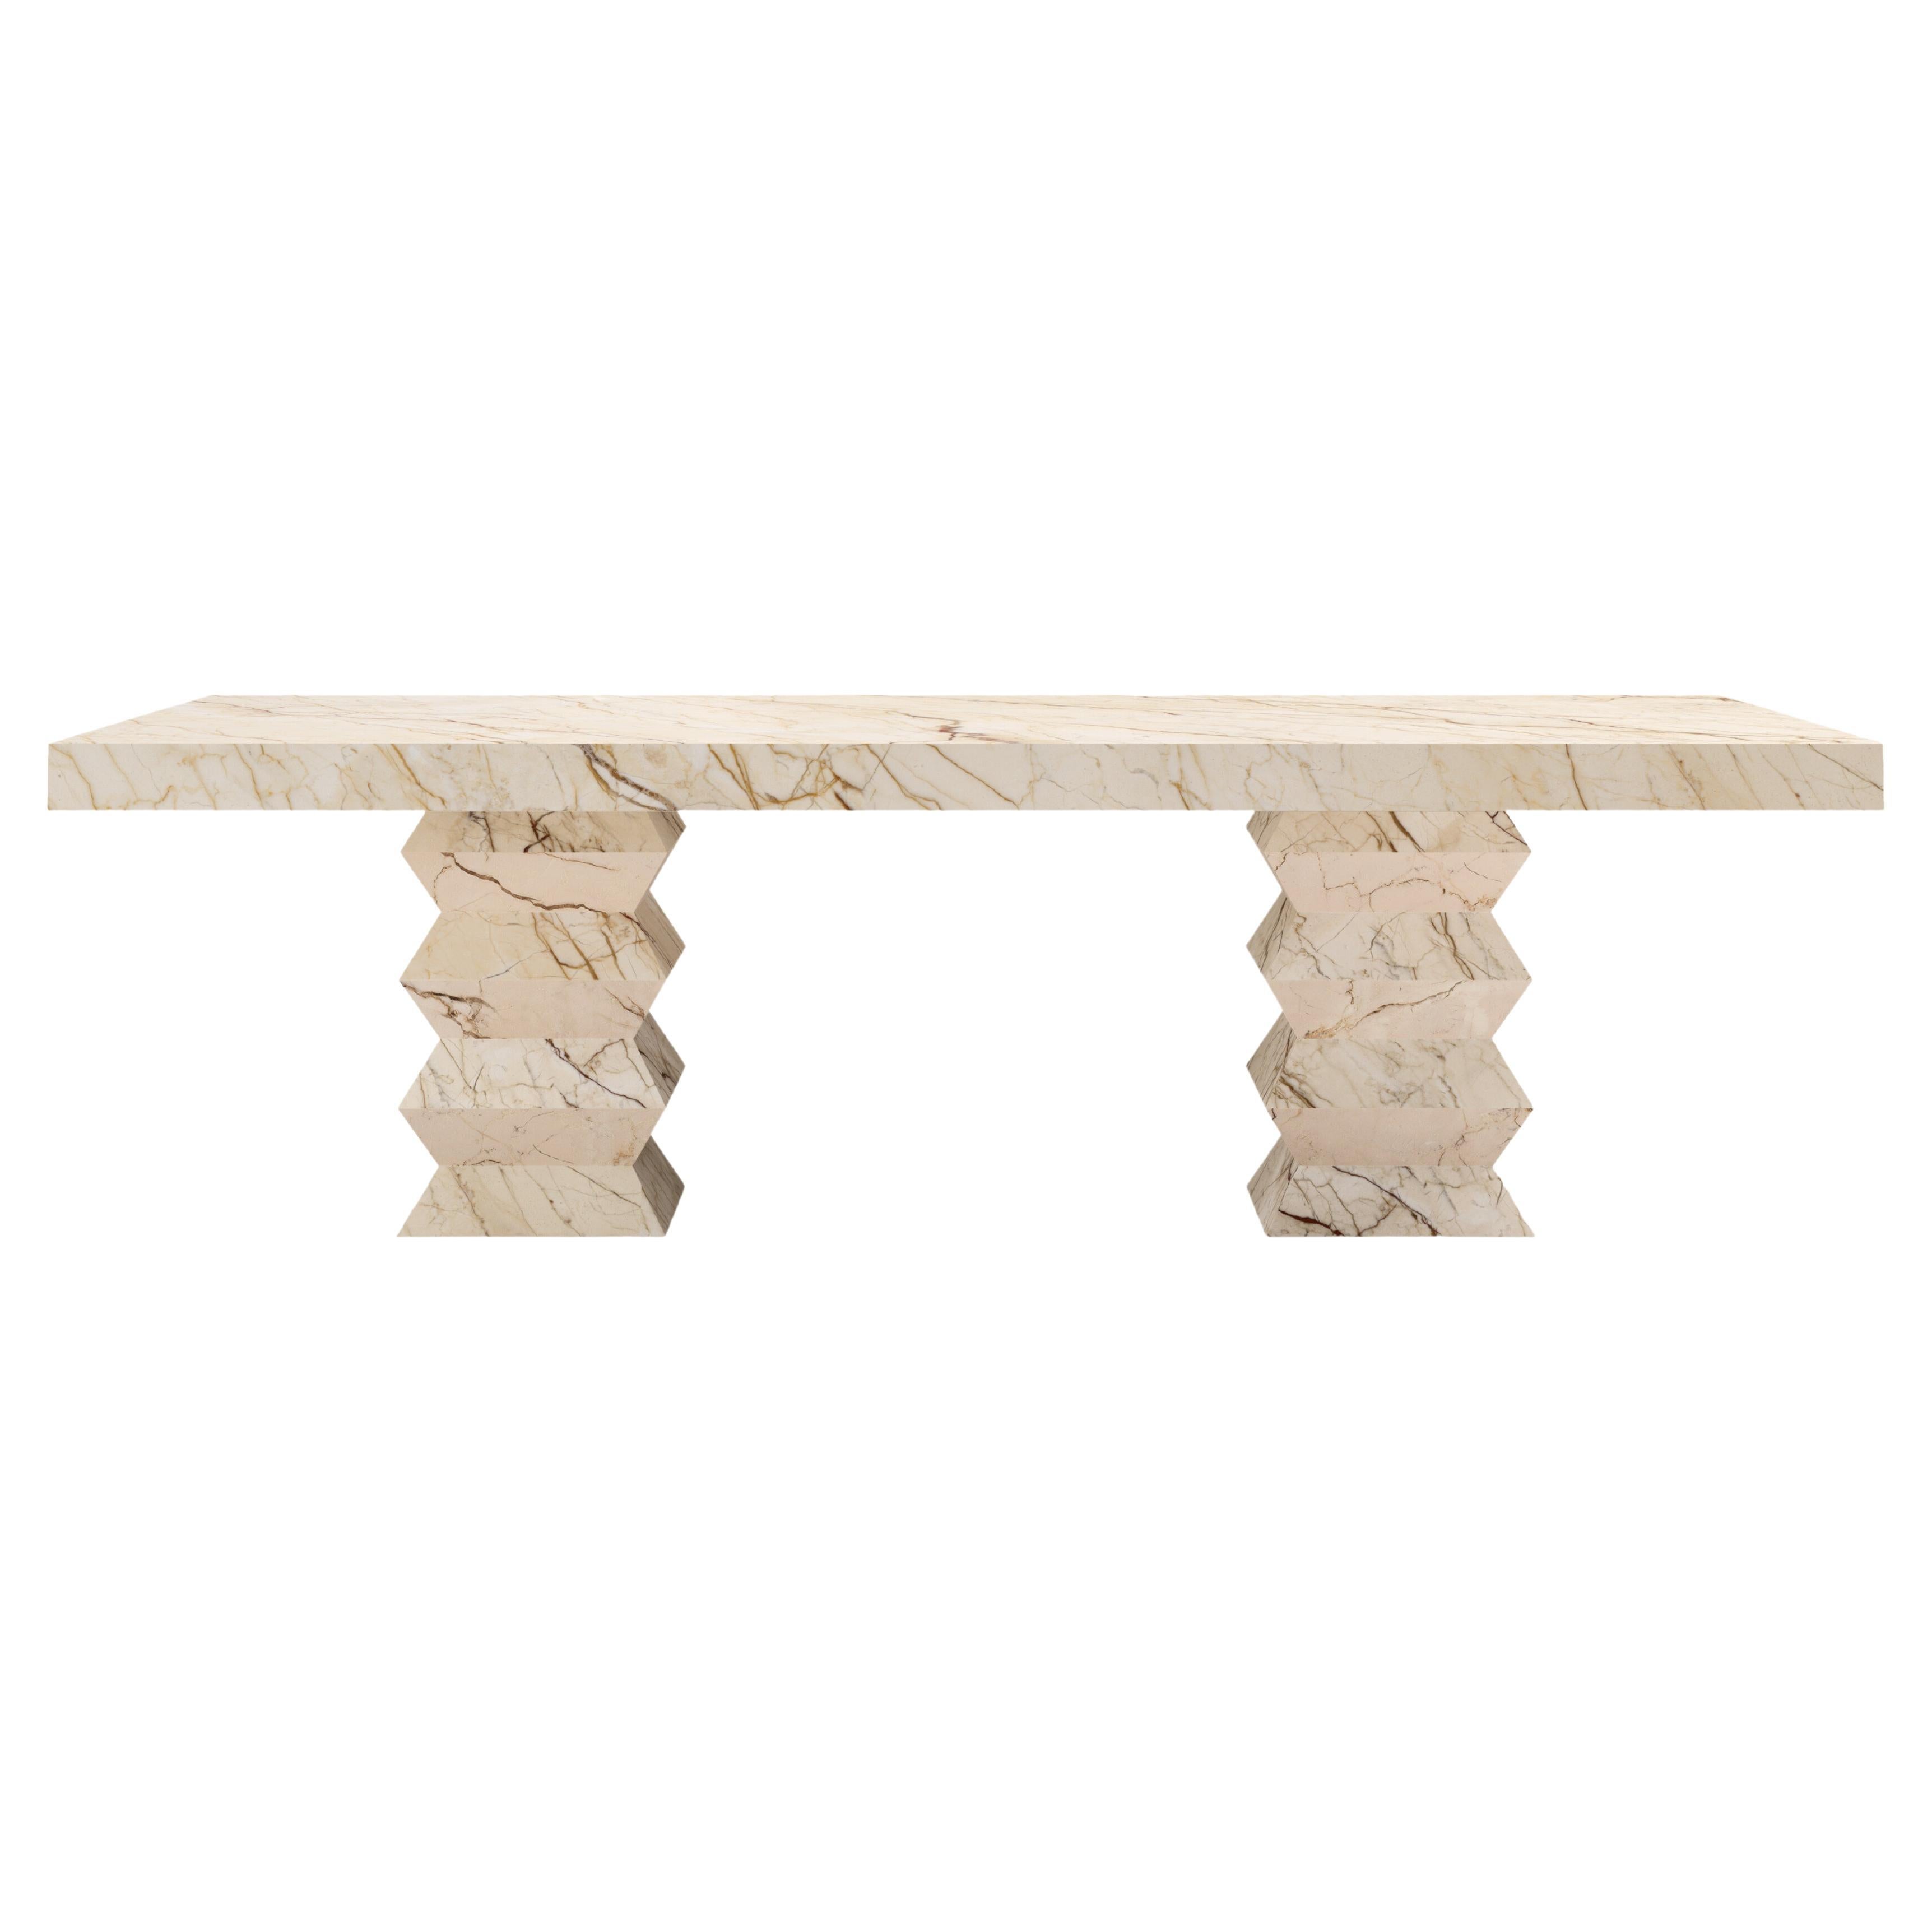 FORM(LA) Grinza Rectangle Dining Table 118"L x 48"W x 32"H Sofita Beige Marble For Sale